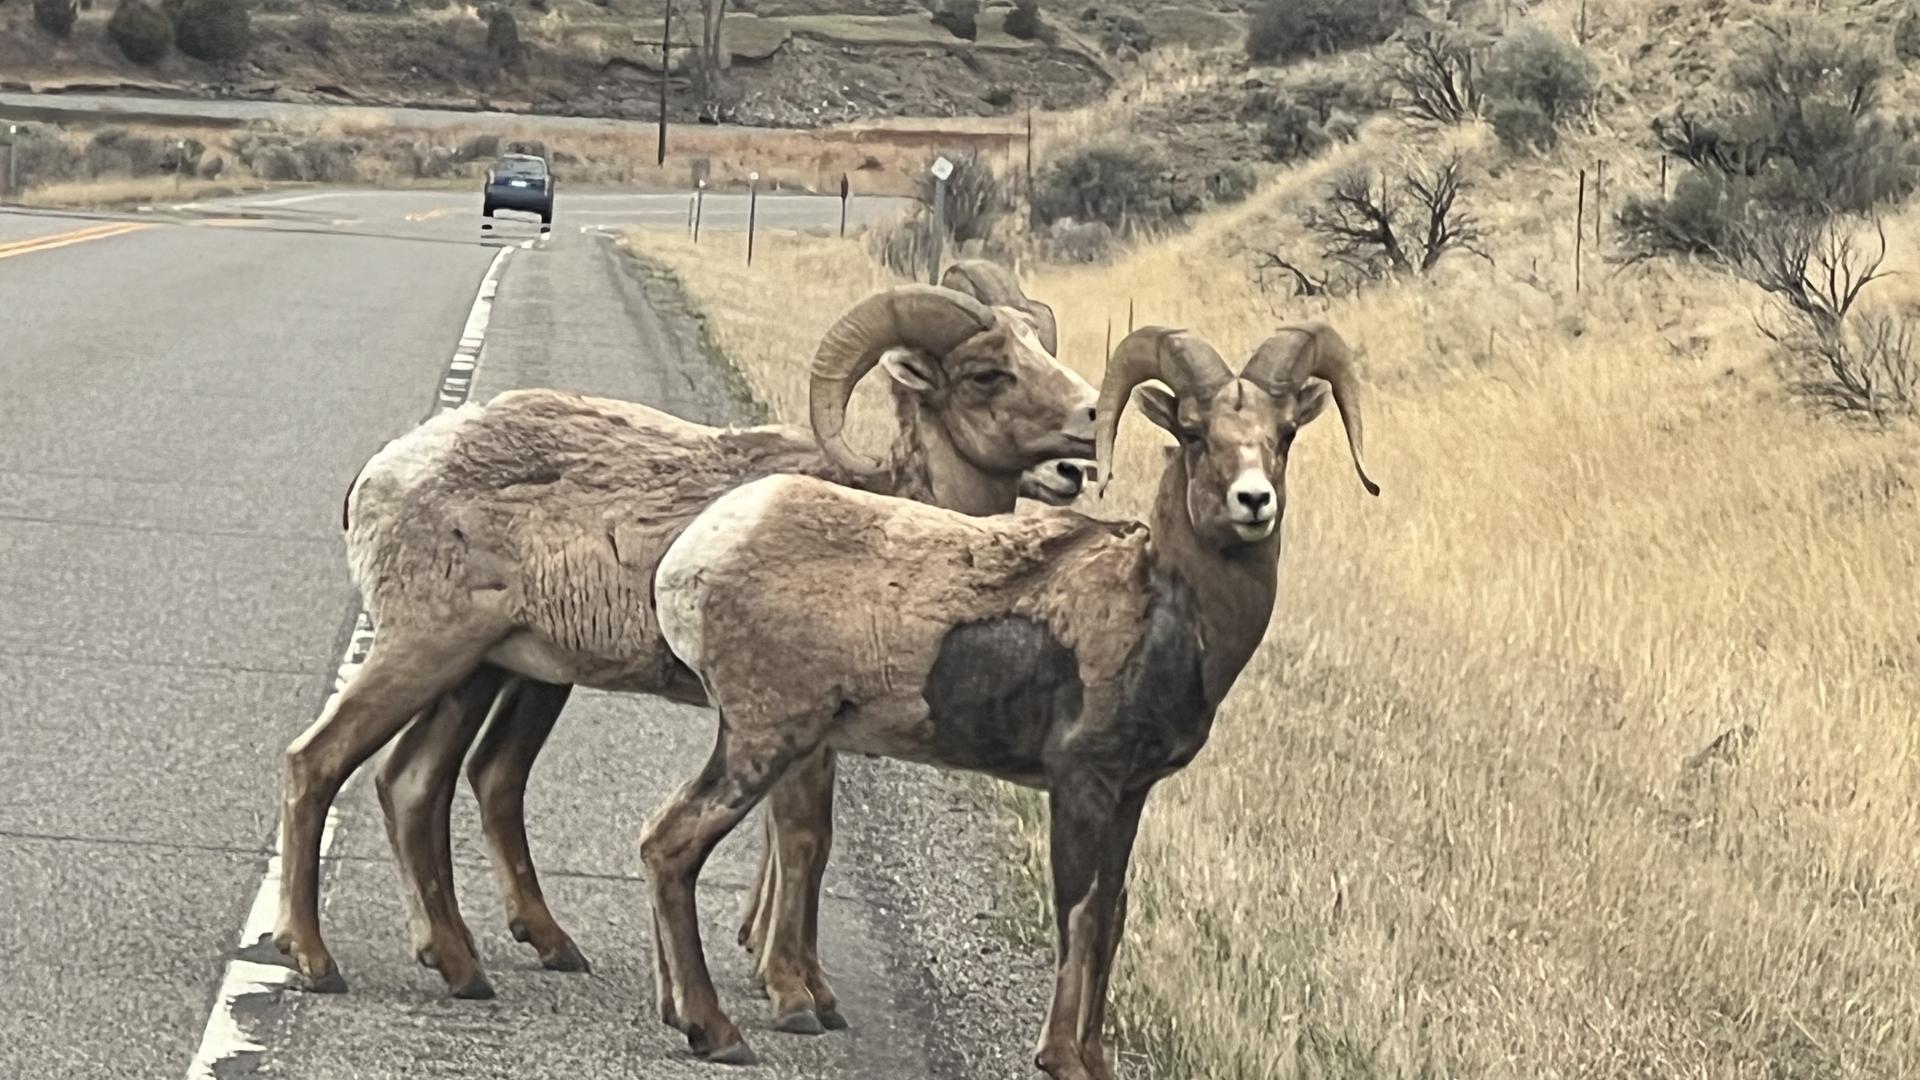 wildlife in the street of the national park